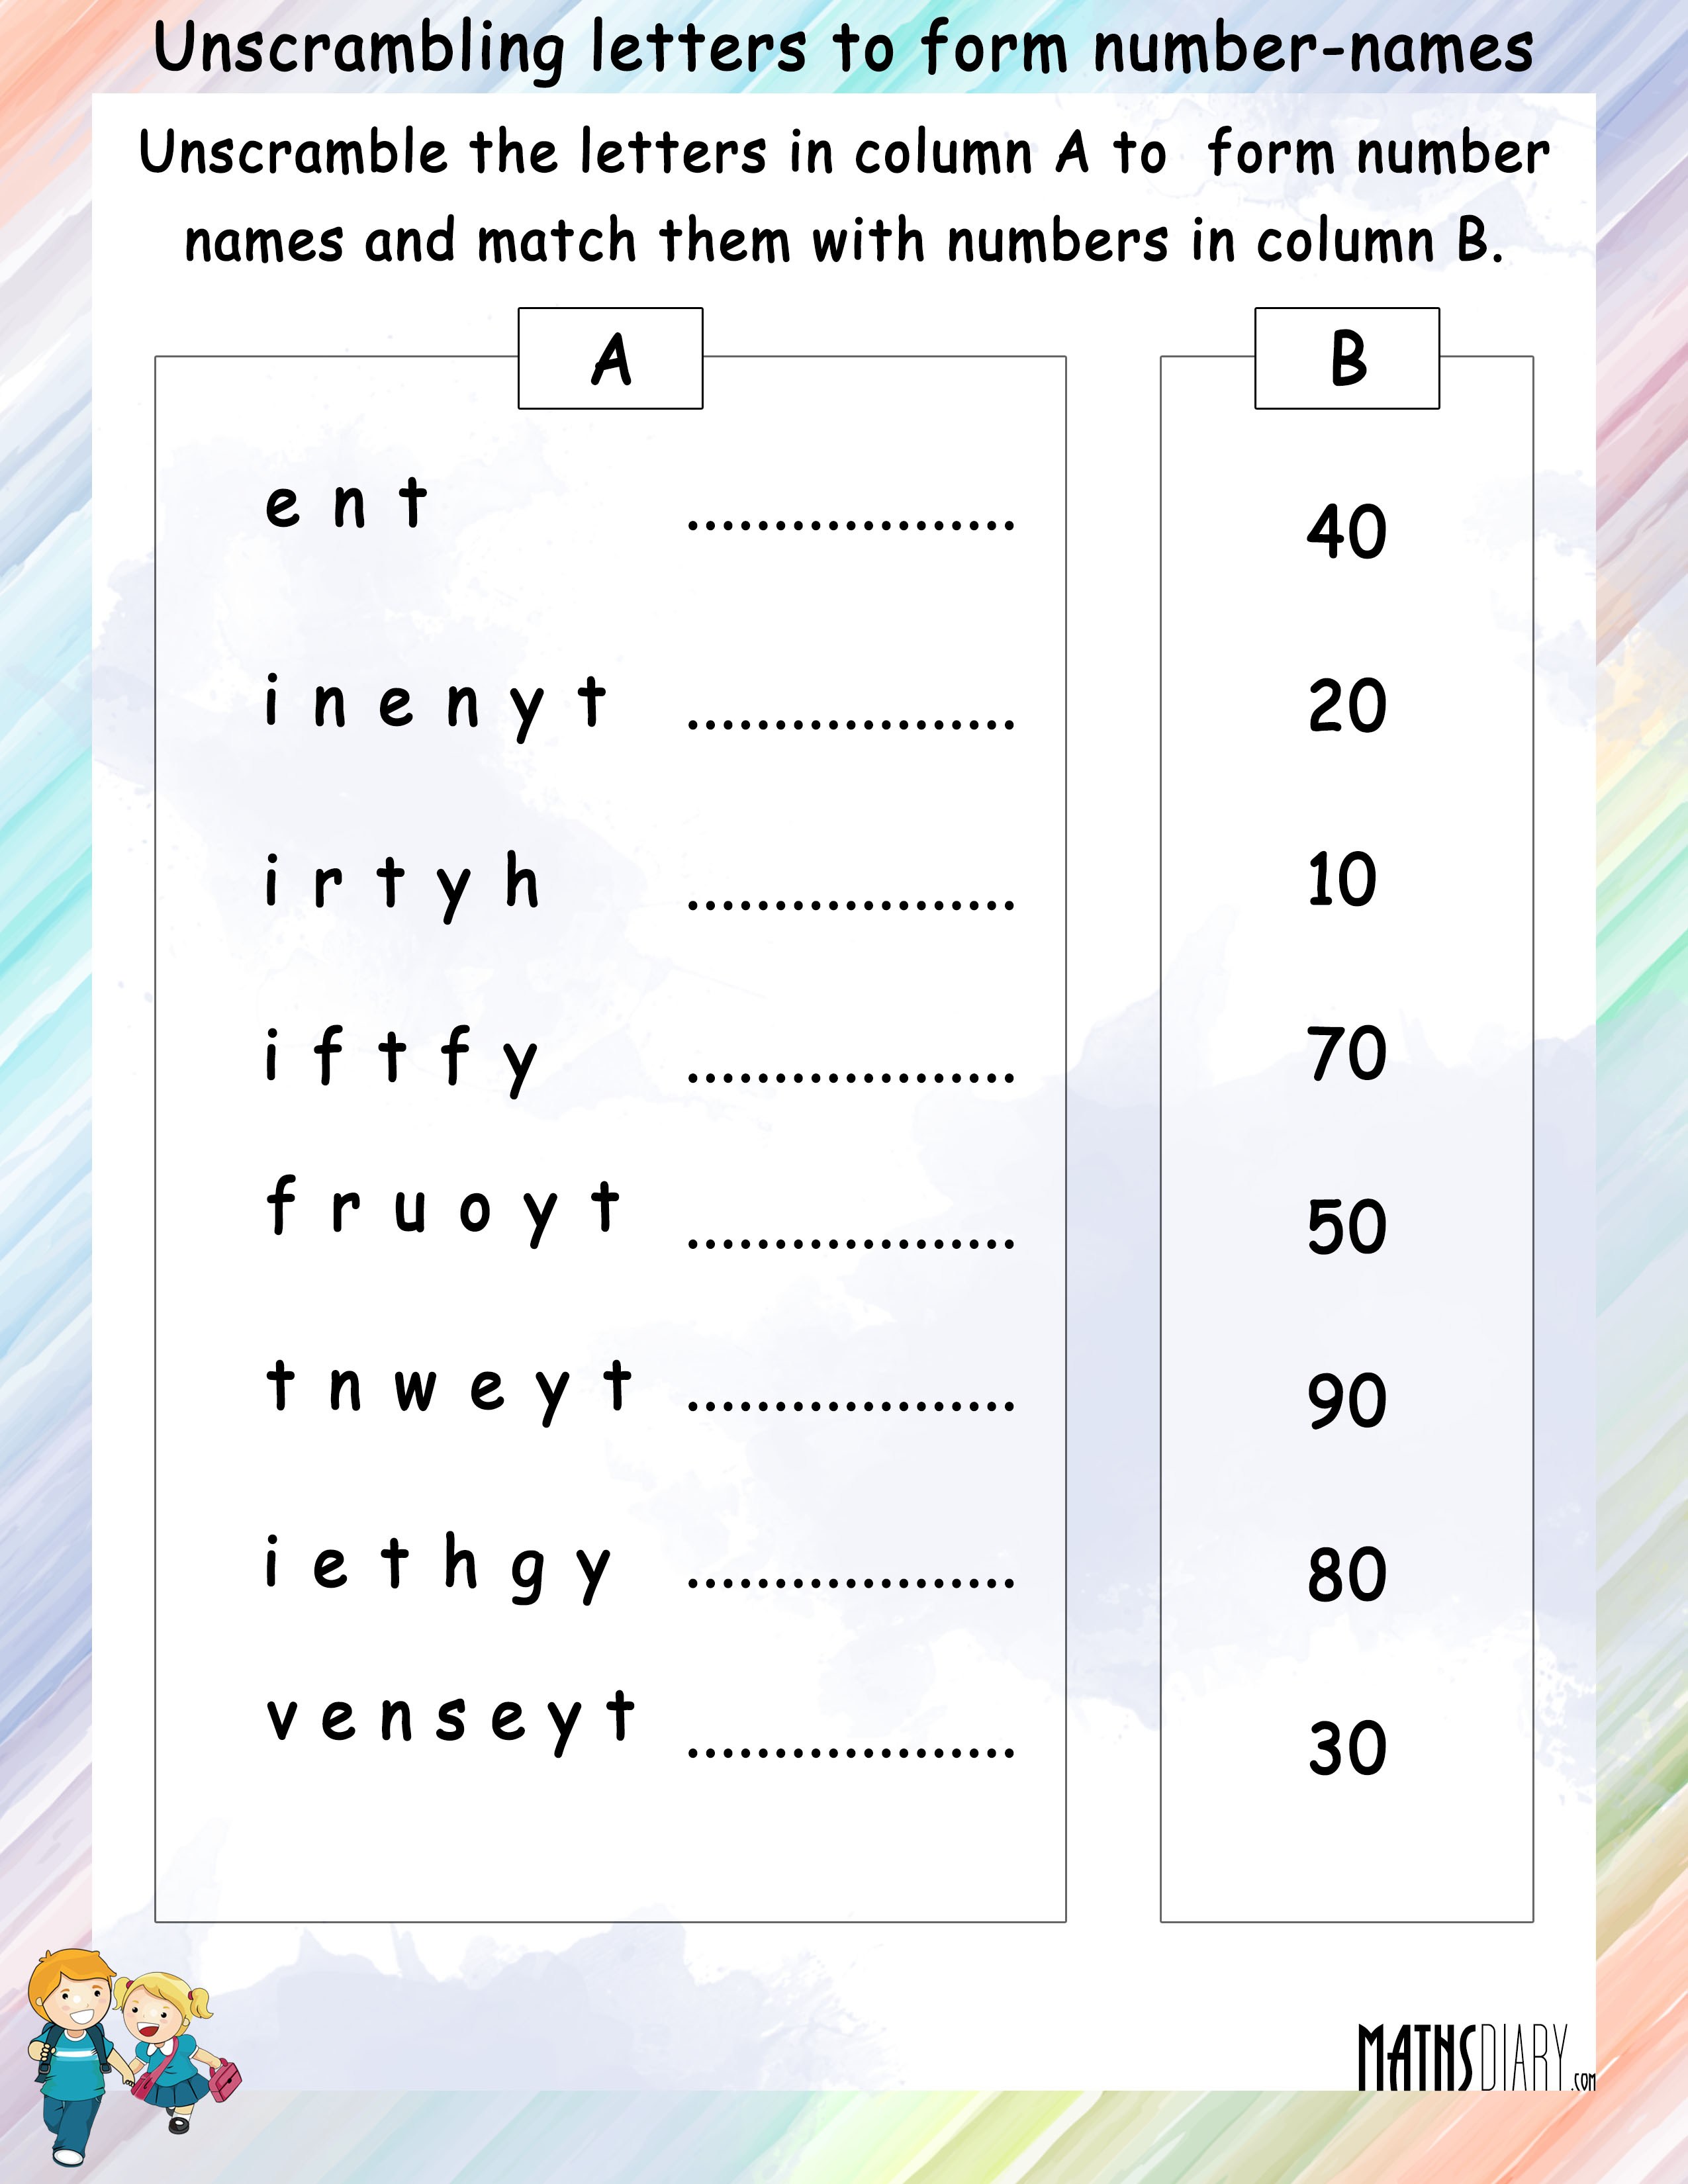 unscramble letters to form number names math worksheets mathsdiary com